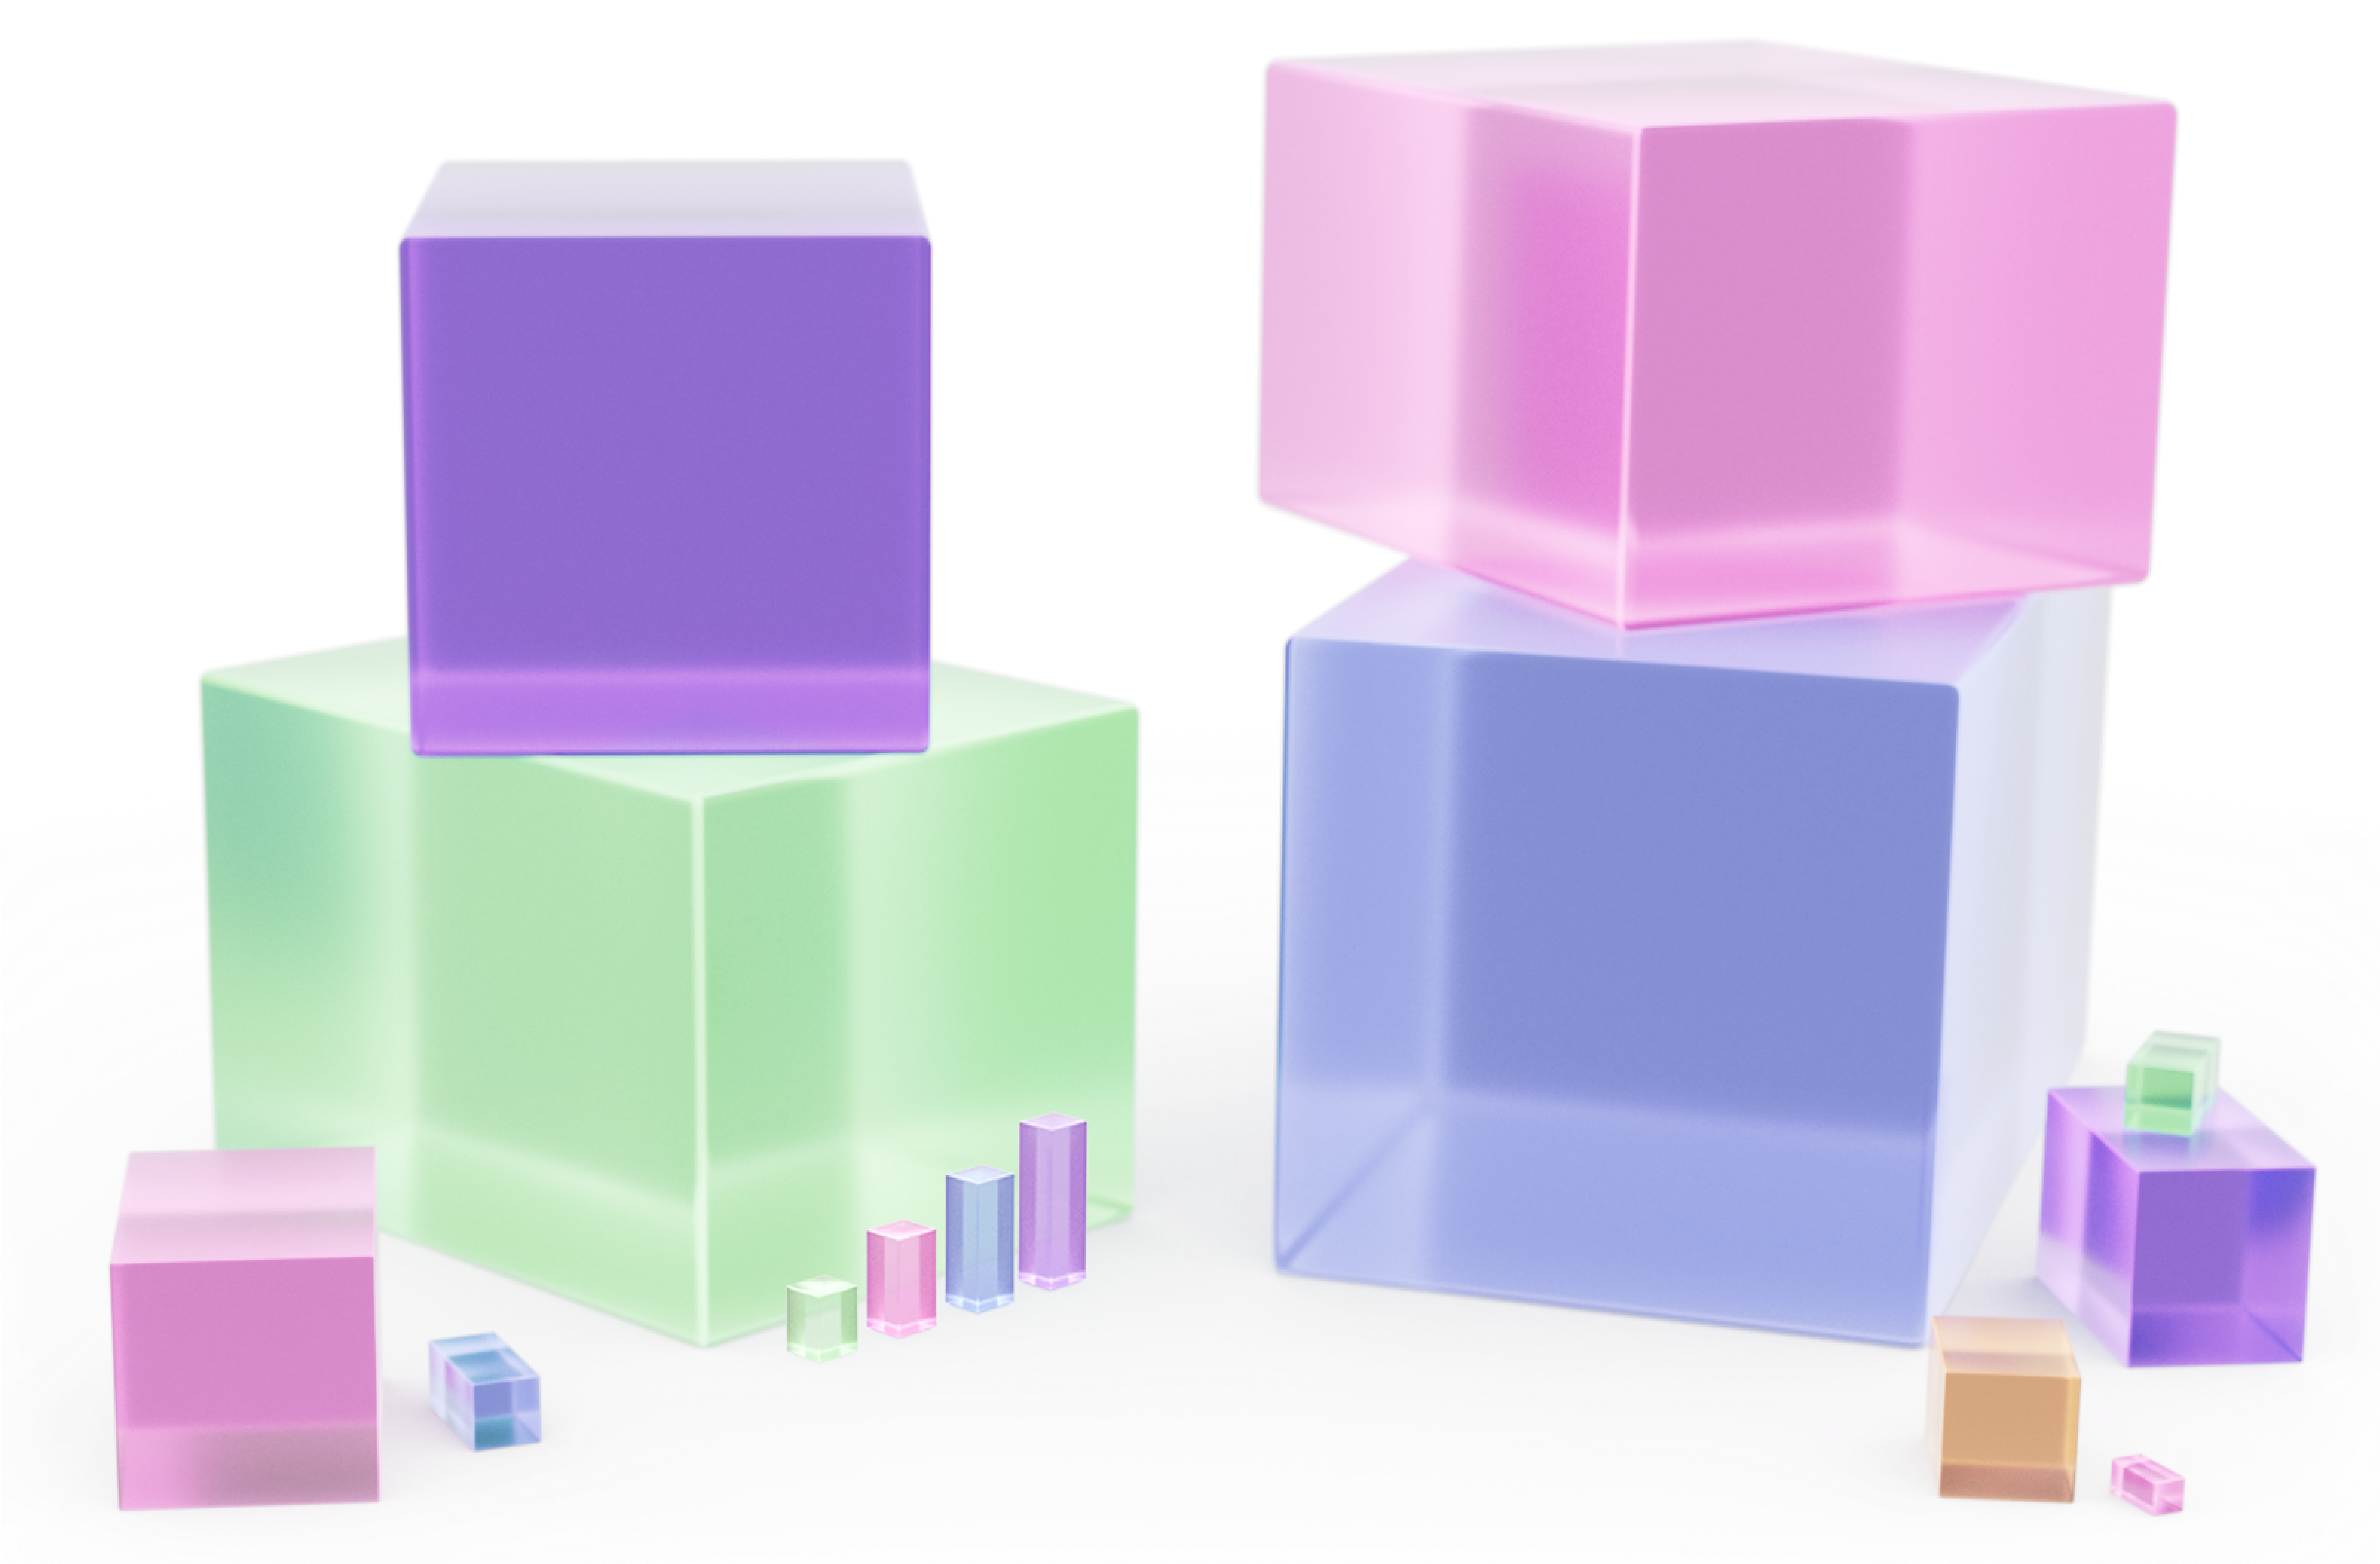 A graphic of some stacked boxes to symbolise containers.